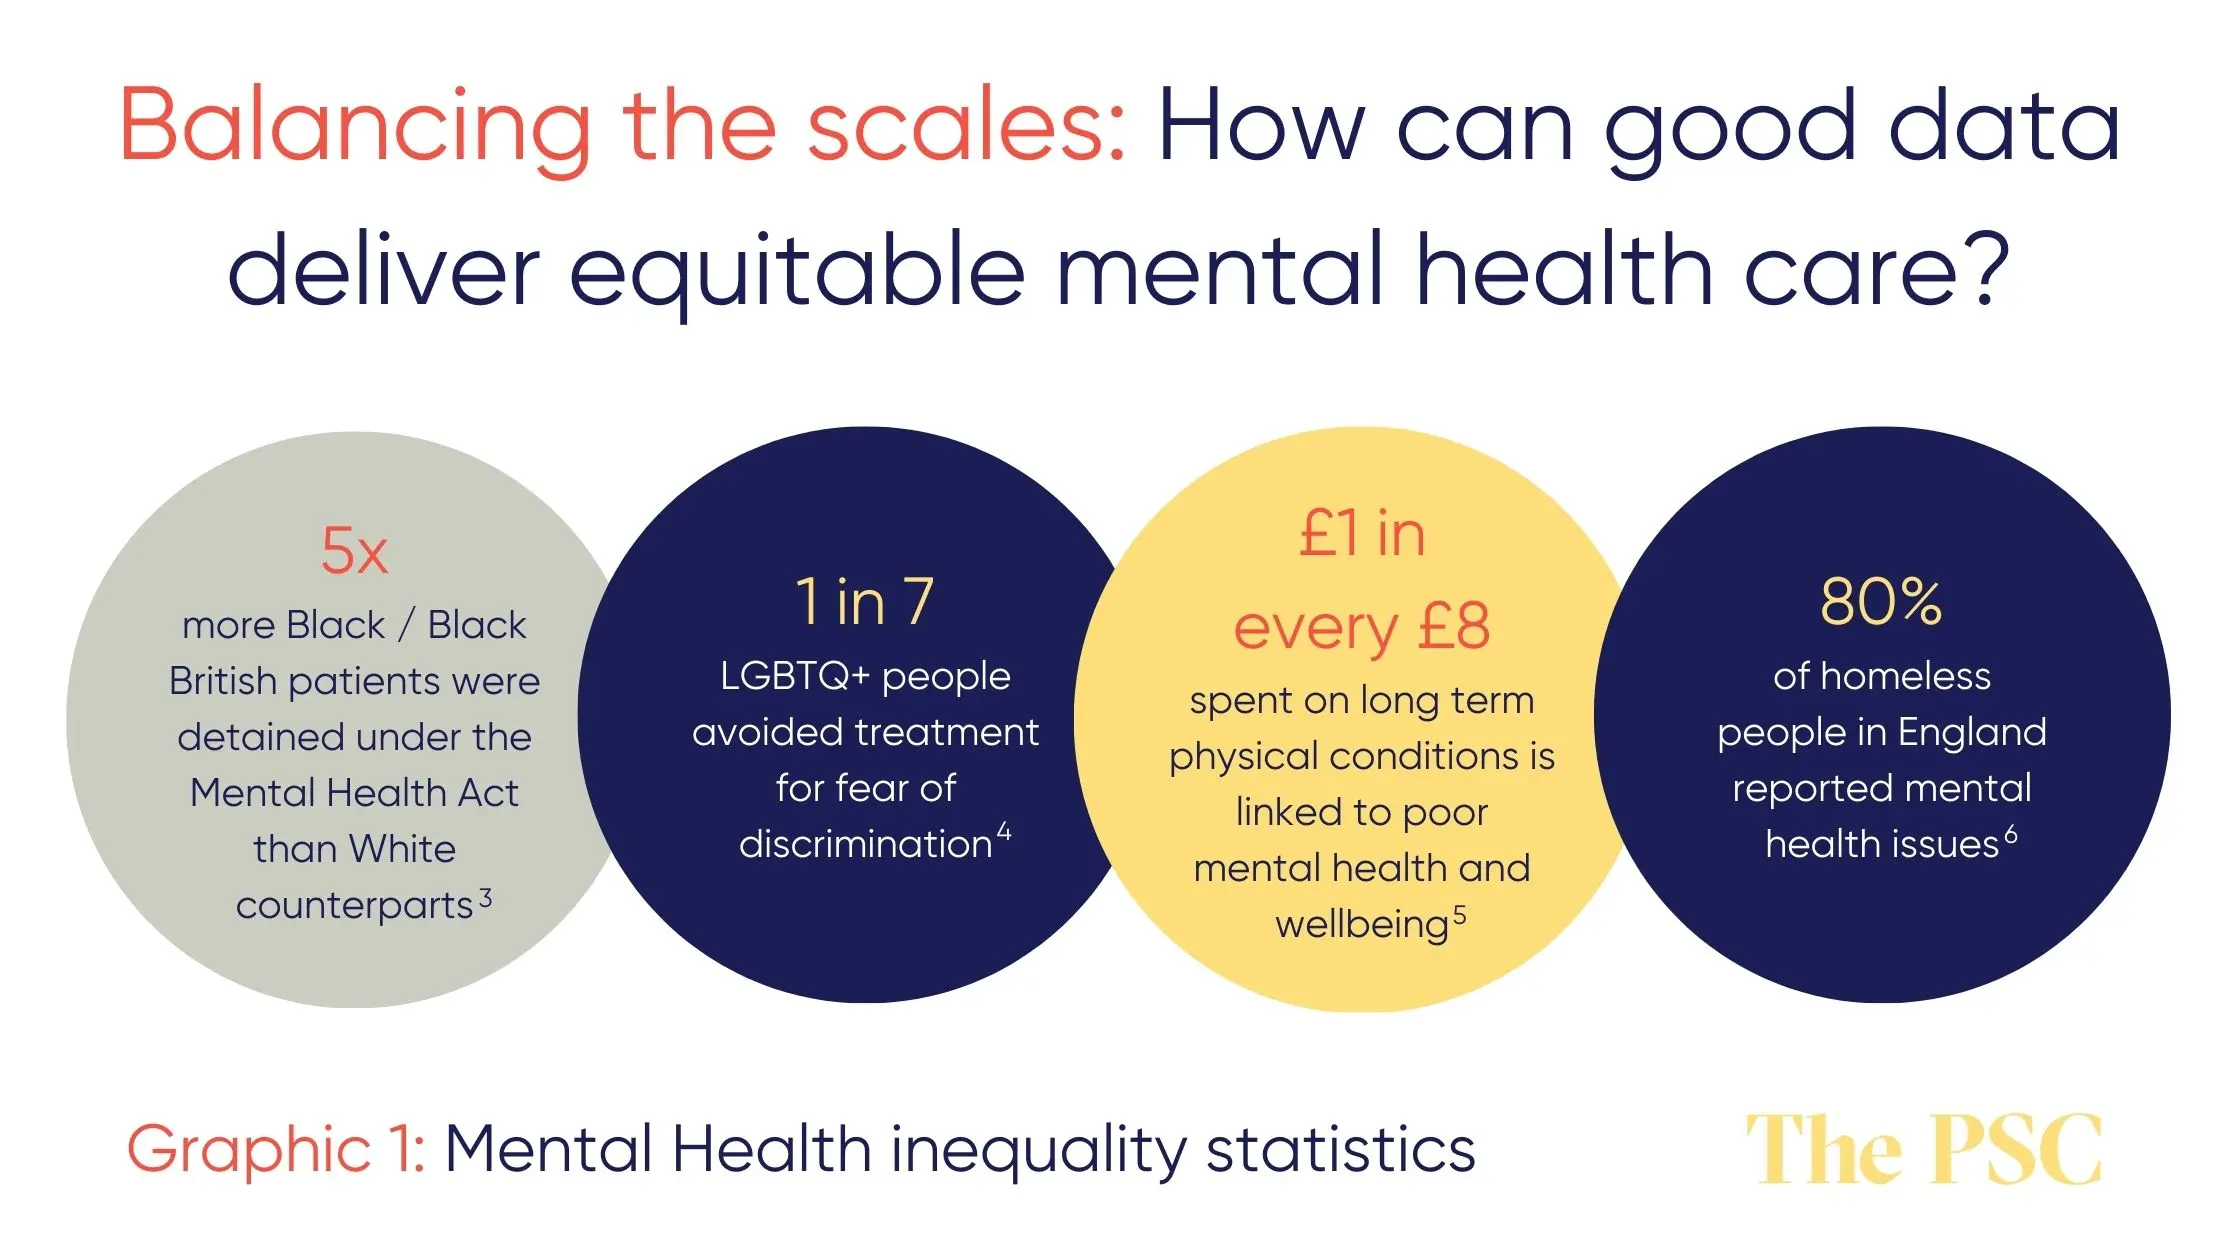 Graphic 1: Balancing the scales - How can good data deliver equitable mental health care? The graphic shows 4 key mental health inequality statistics in 4 circles. These are bullet pointed in the article below.